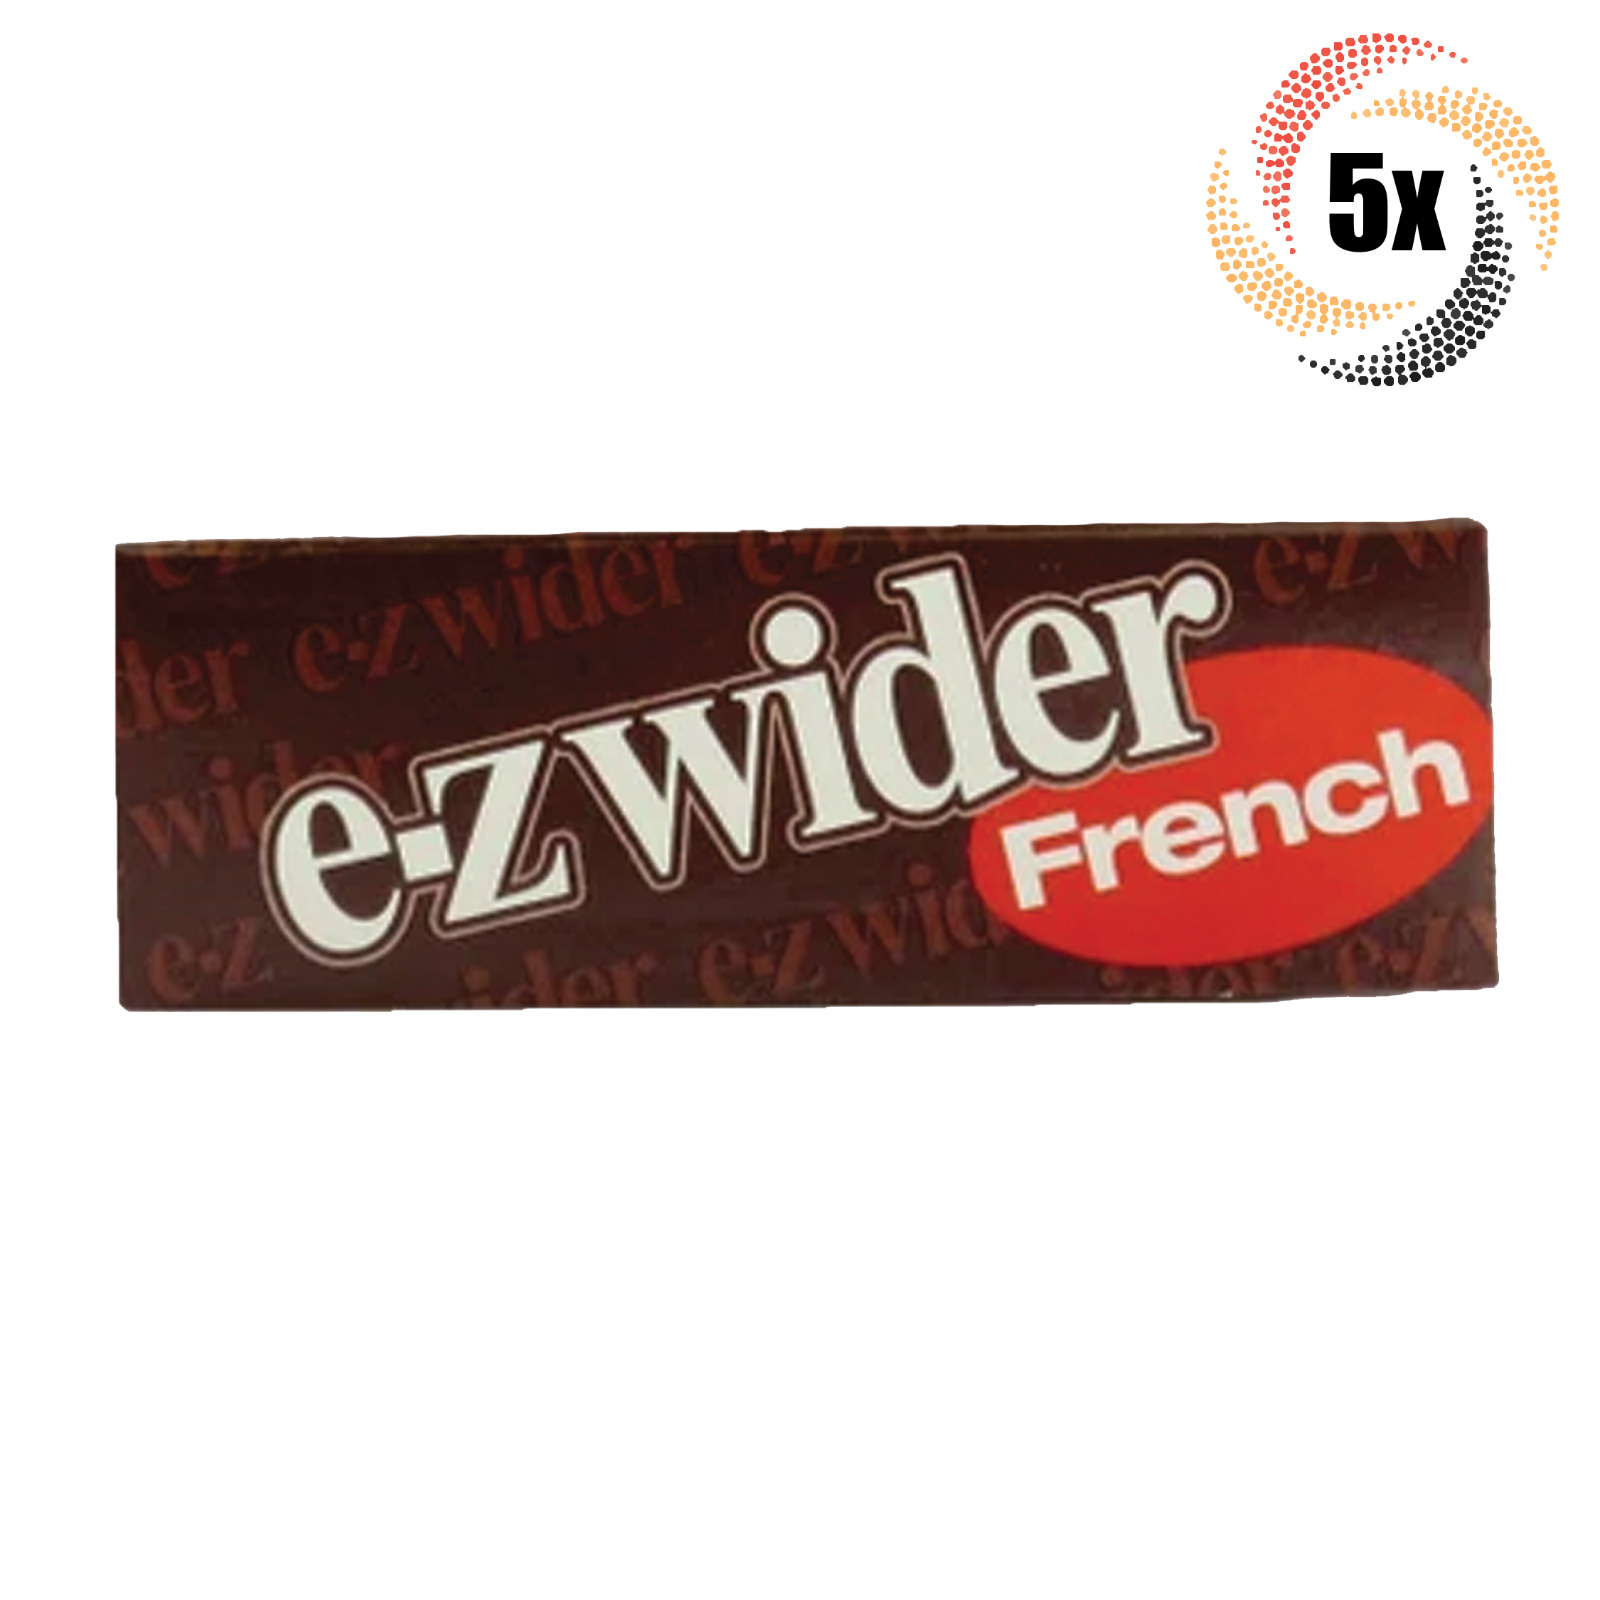 5x Packs E-Z Wider French | 1 1/4 1.25 | 24 Papers Per Pack | + 2 Rolling Tubes